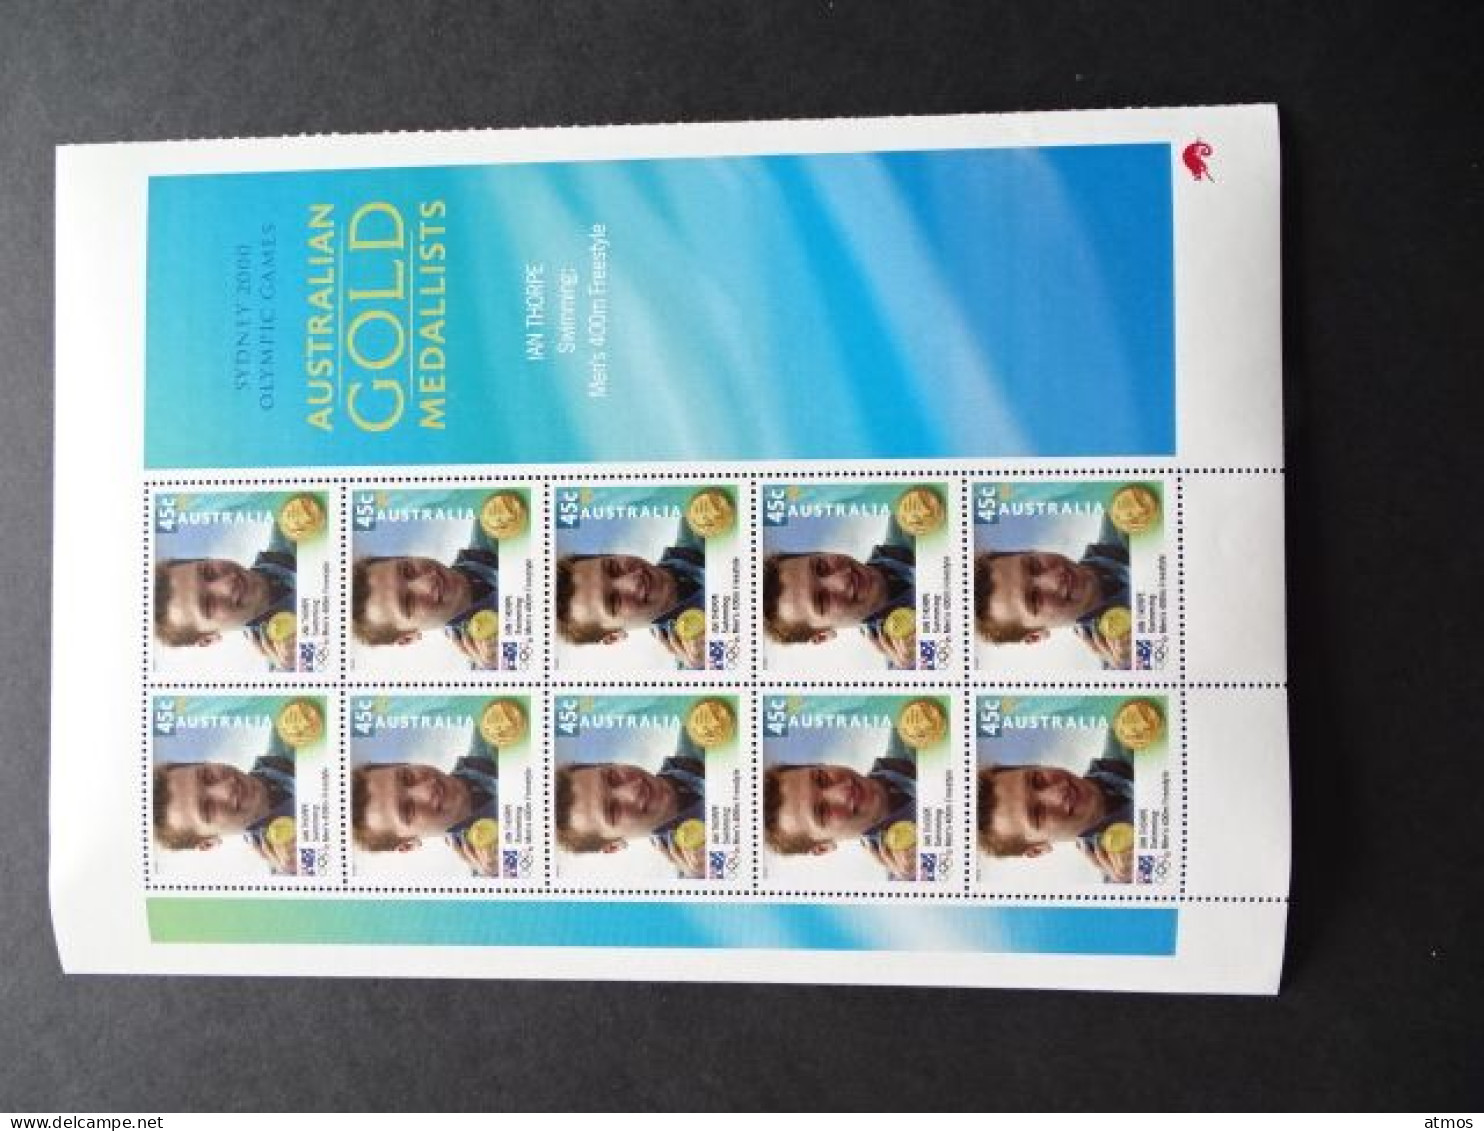 Australia MNH Michel Nr 1973 Sheet Of 10 From  2000 VIC - Mint Stamps